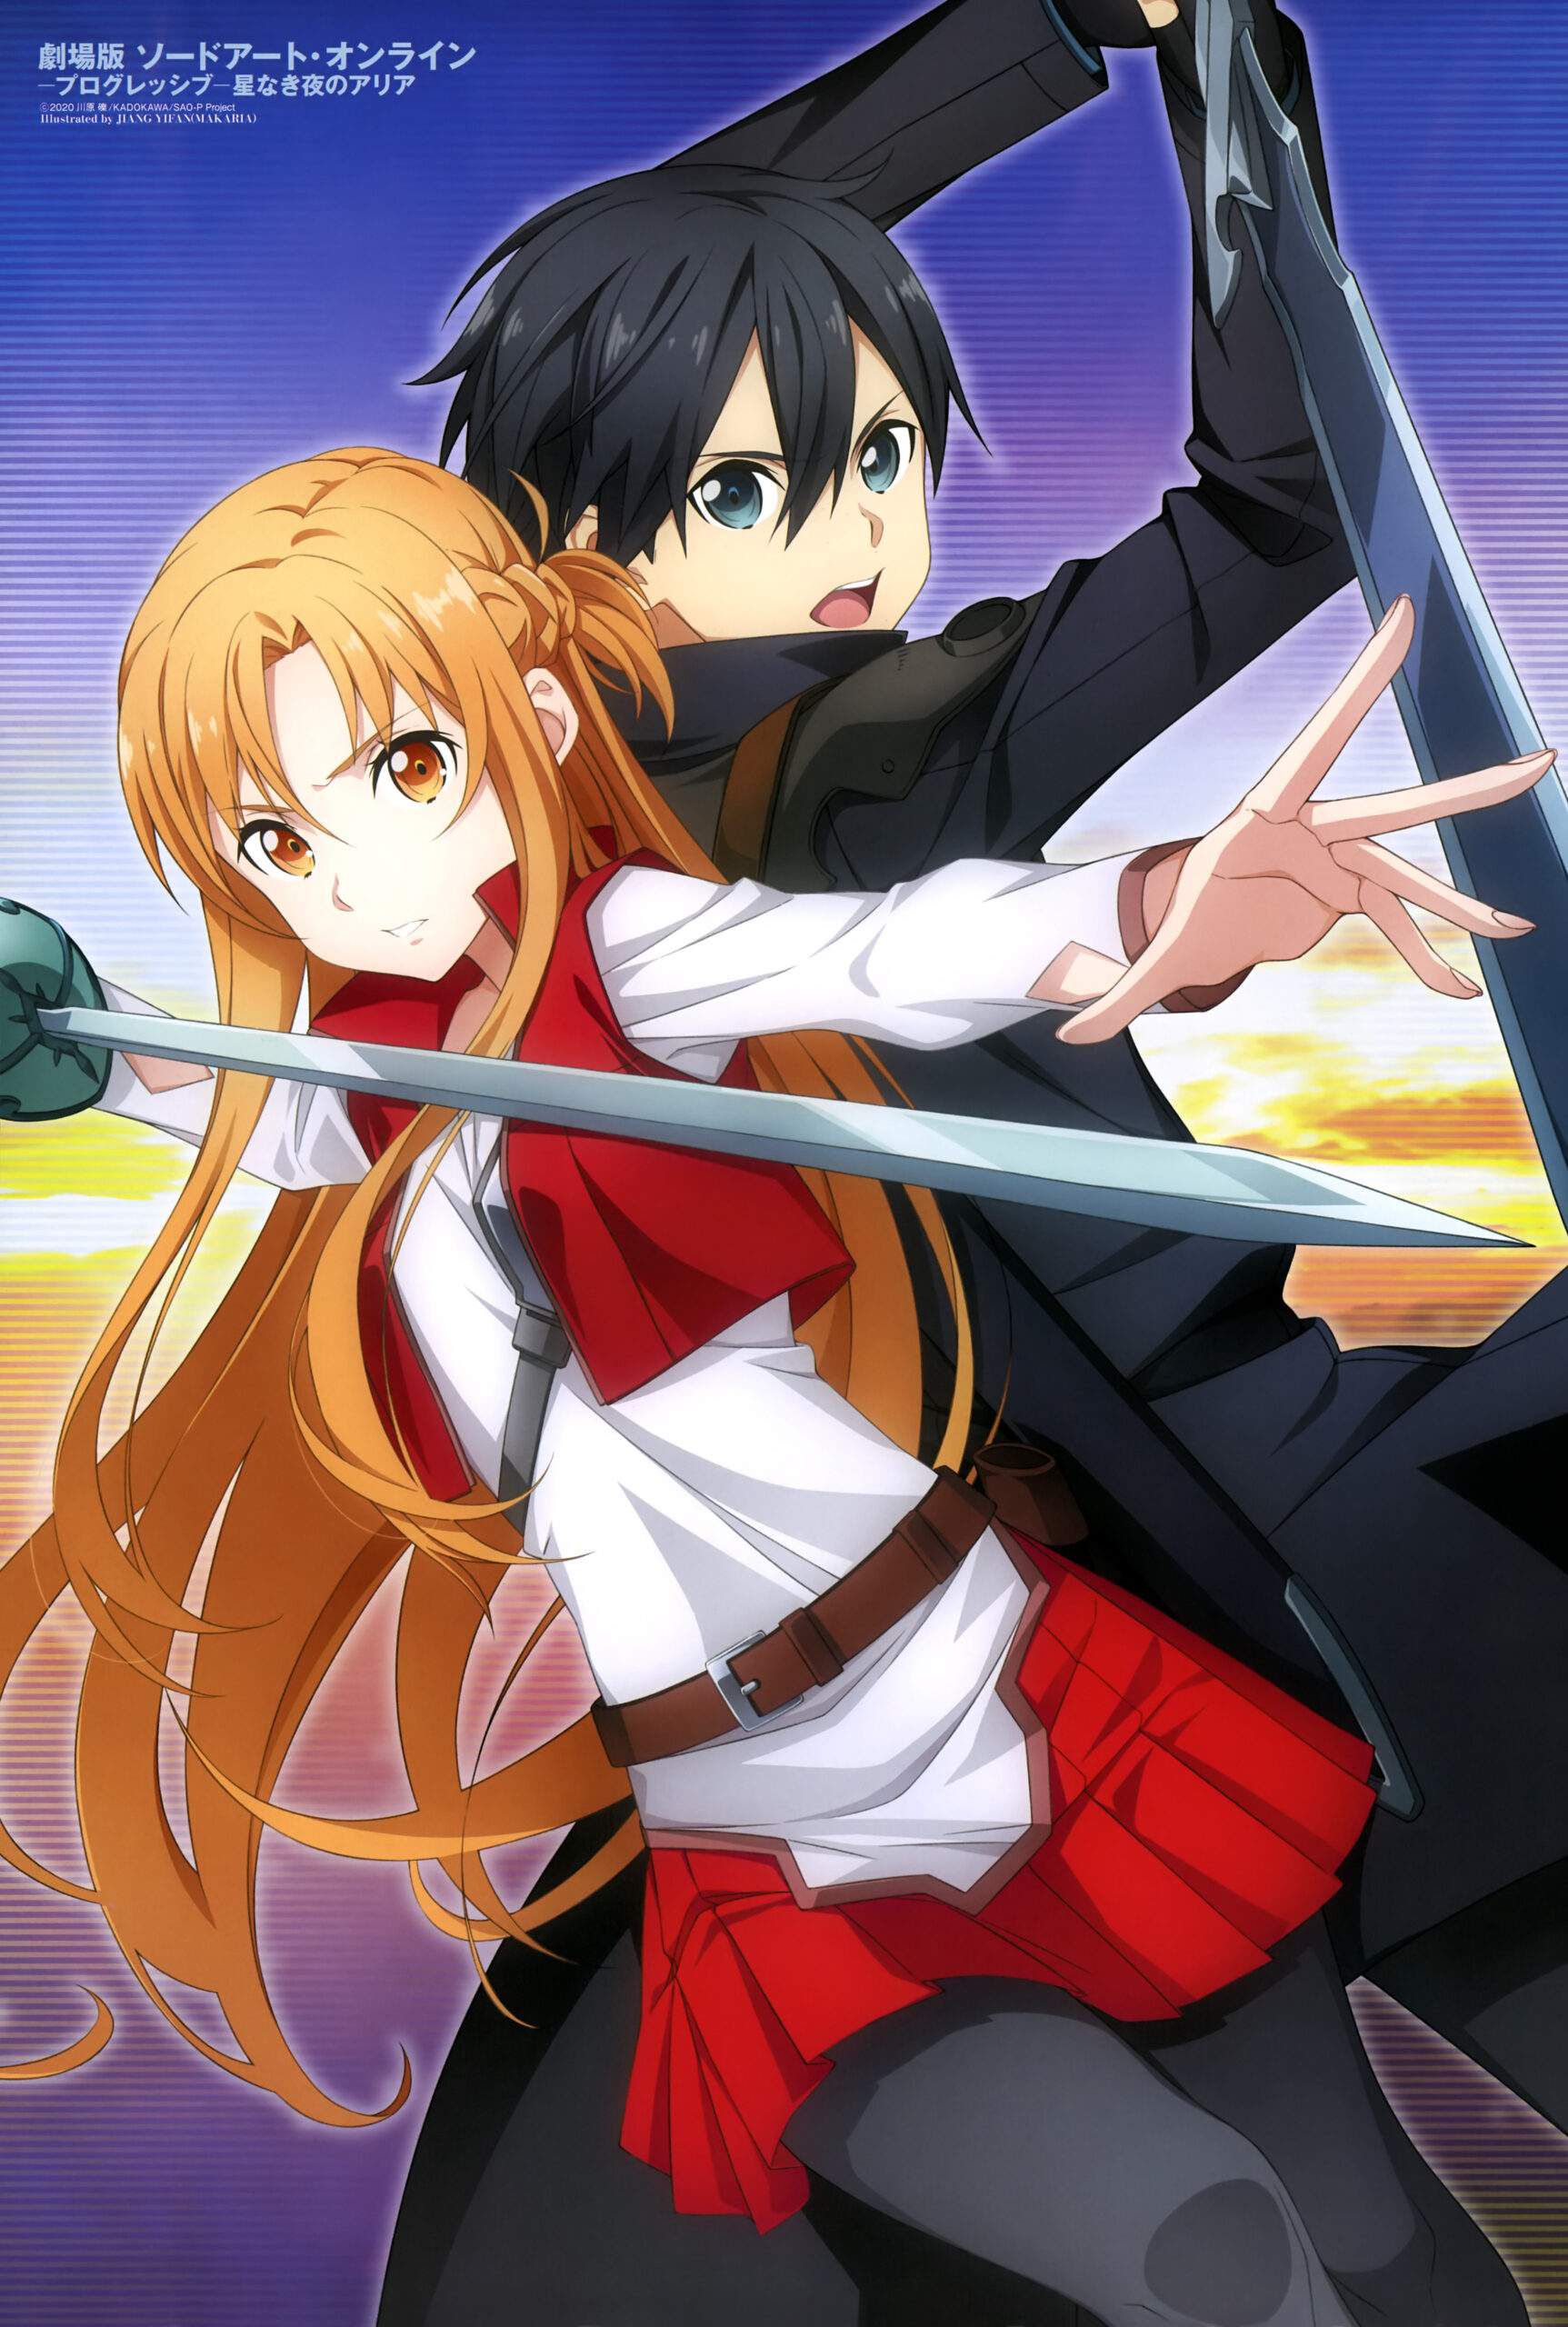 [Sword Art Online (SAO)] Erotic images such as Asuna-chan 74th 38